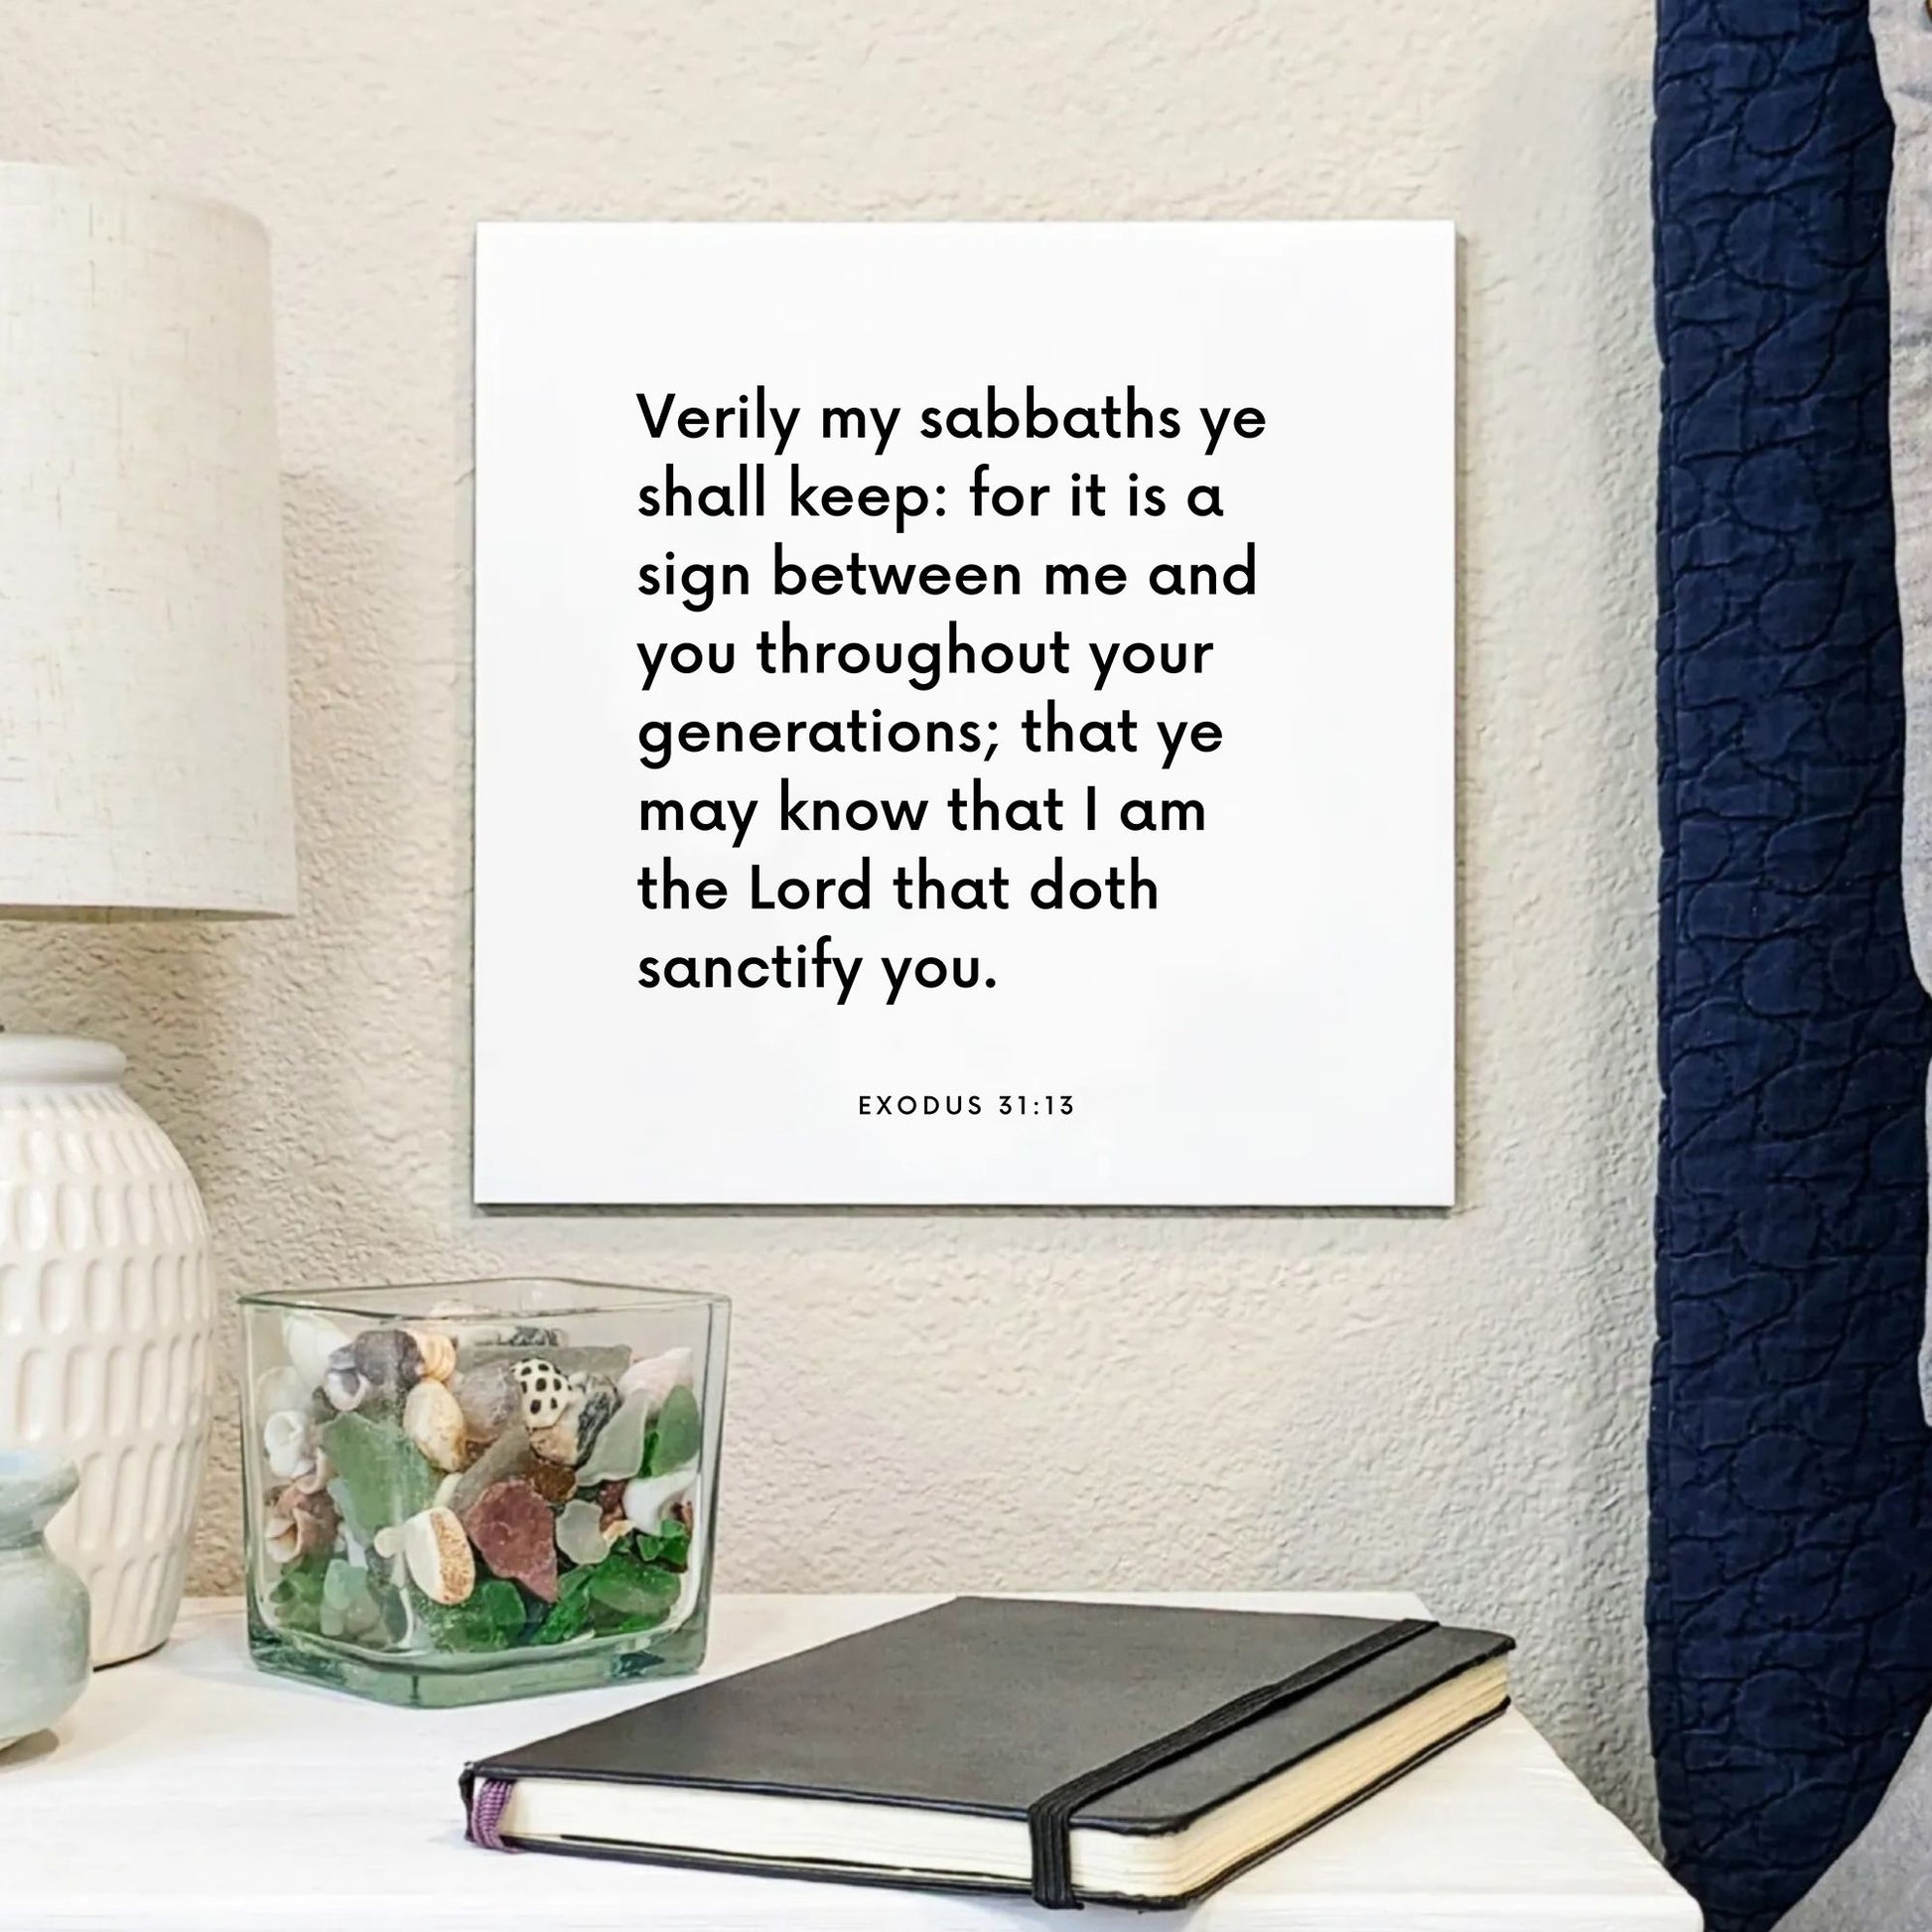 Bedside mouting of the scripture tile for Exodus 31:13 - "Verily my sabbaths ye shall keep"